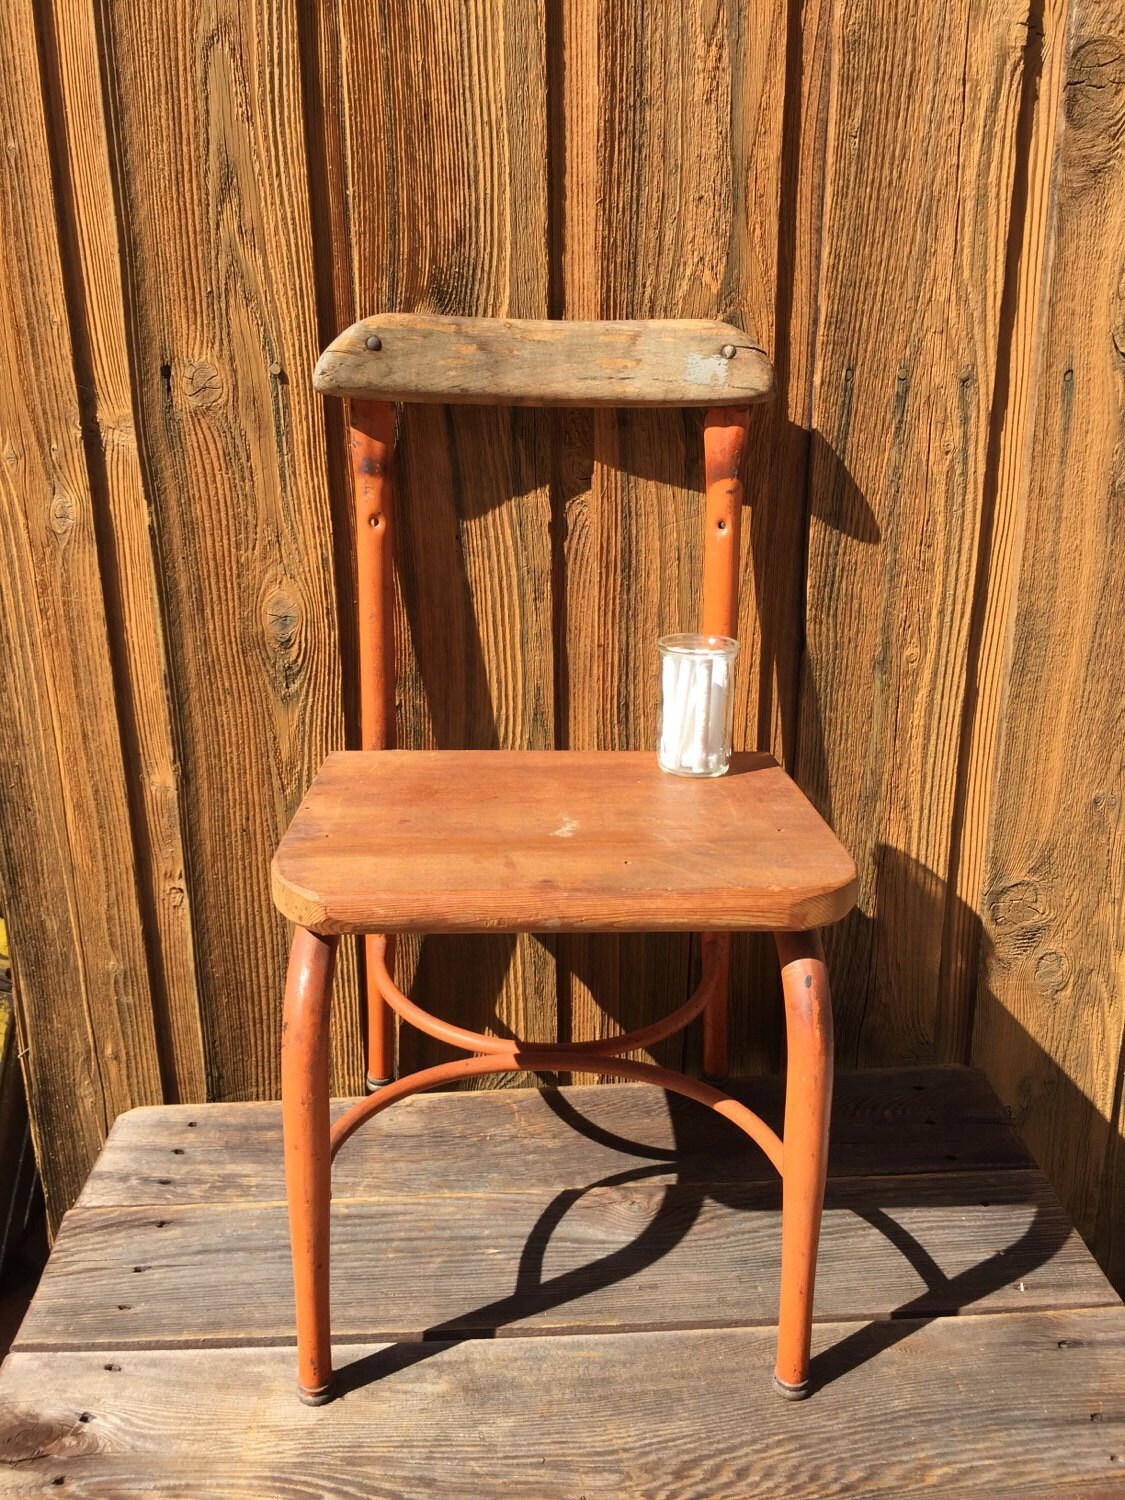 Vintage Child's Desk Chair / Kid's Chair / Wood and Metal ...